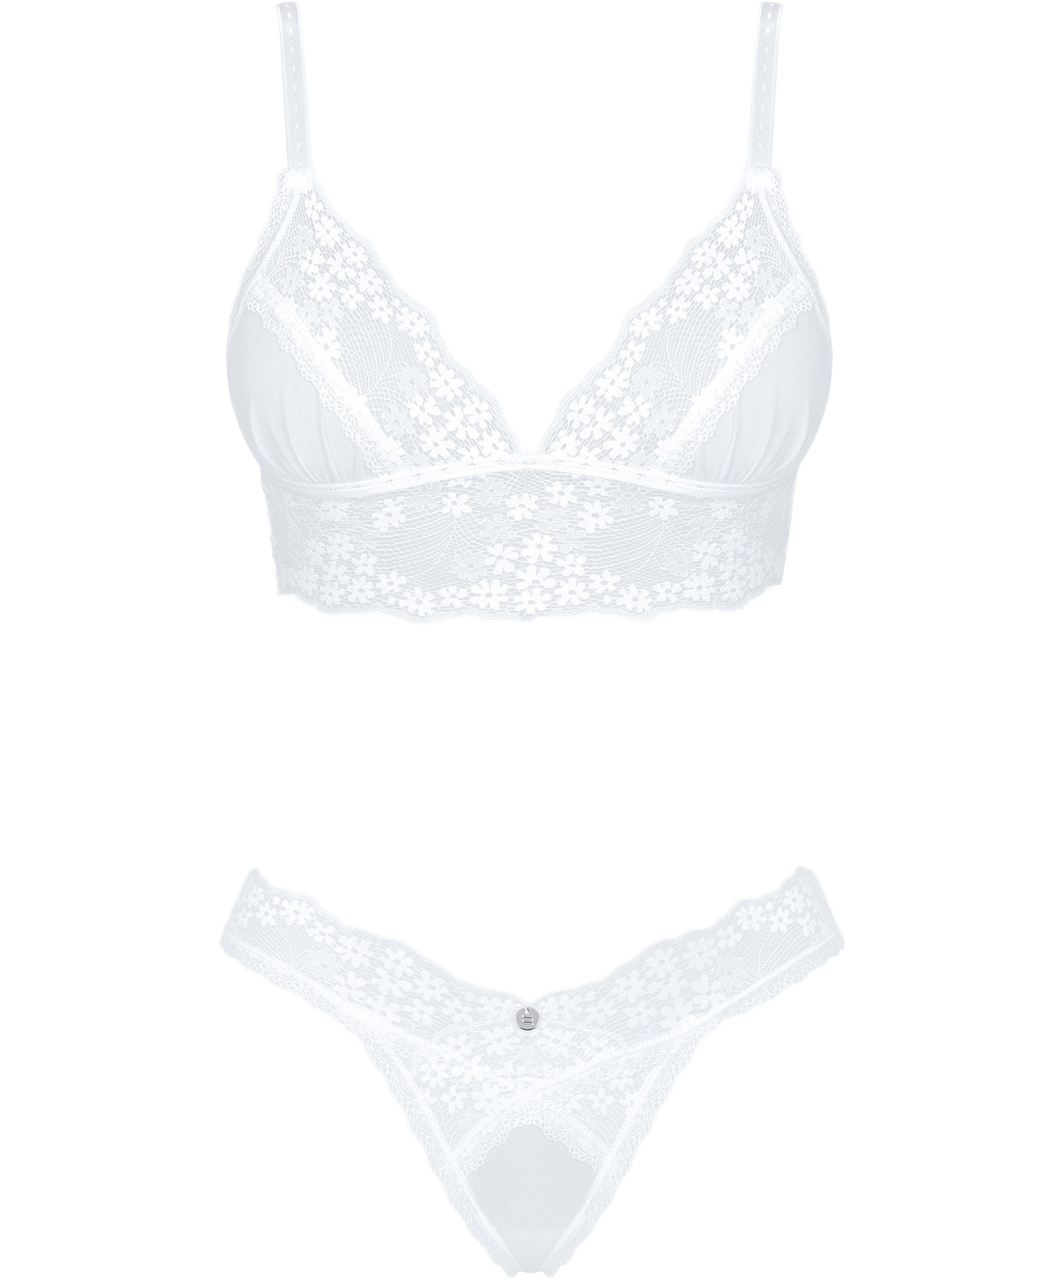 Obsessive Heavenlly White Lace Lingerie Set Sexystyleeu